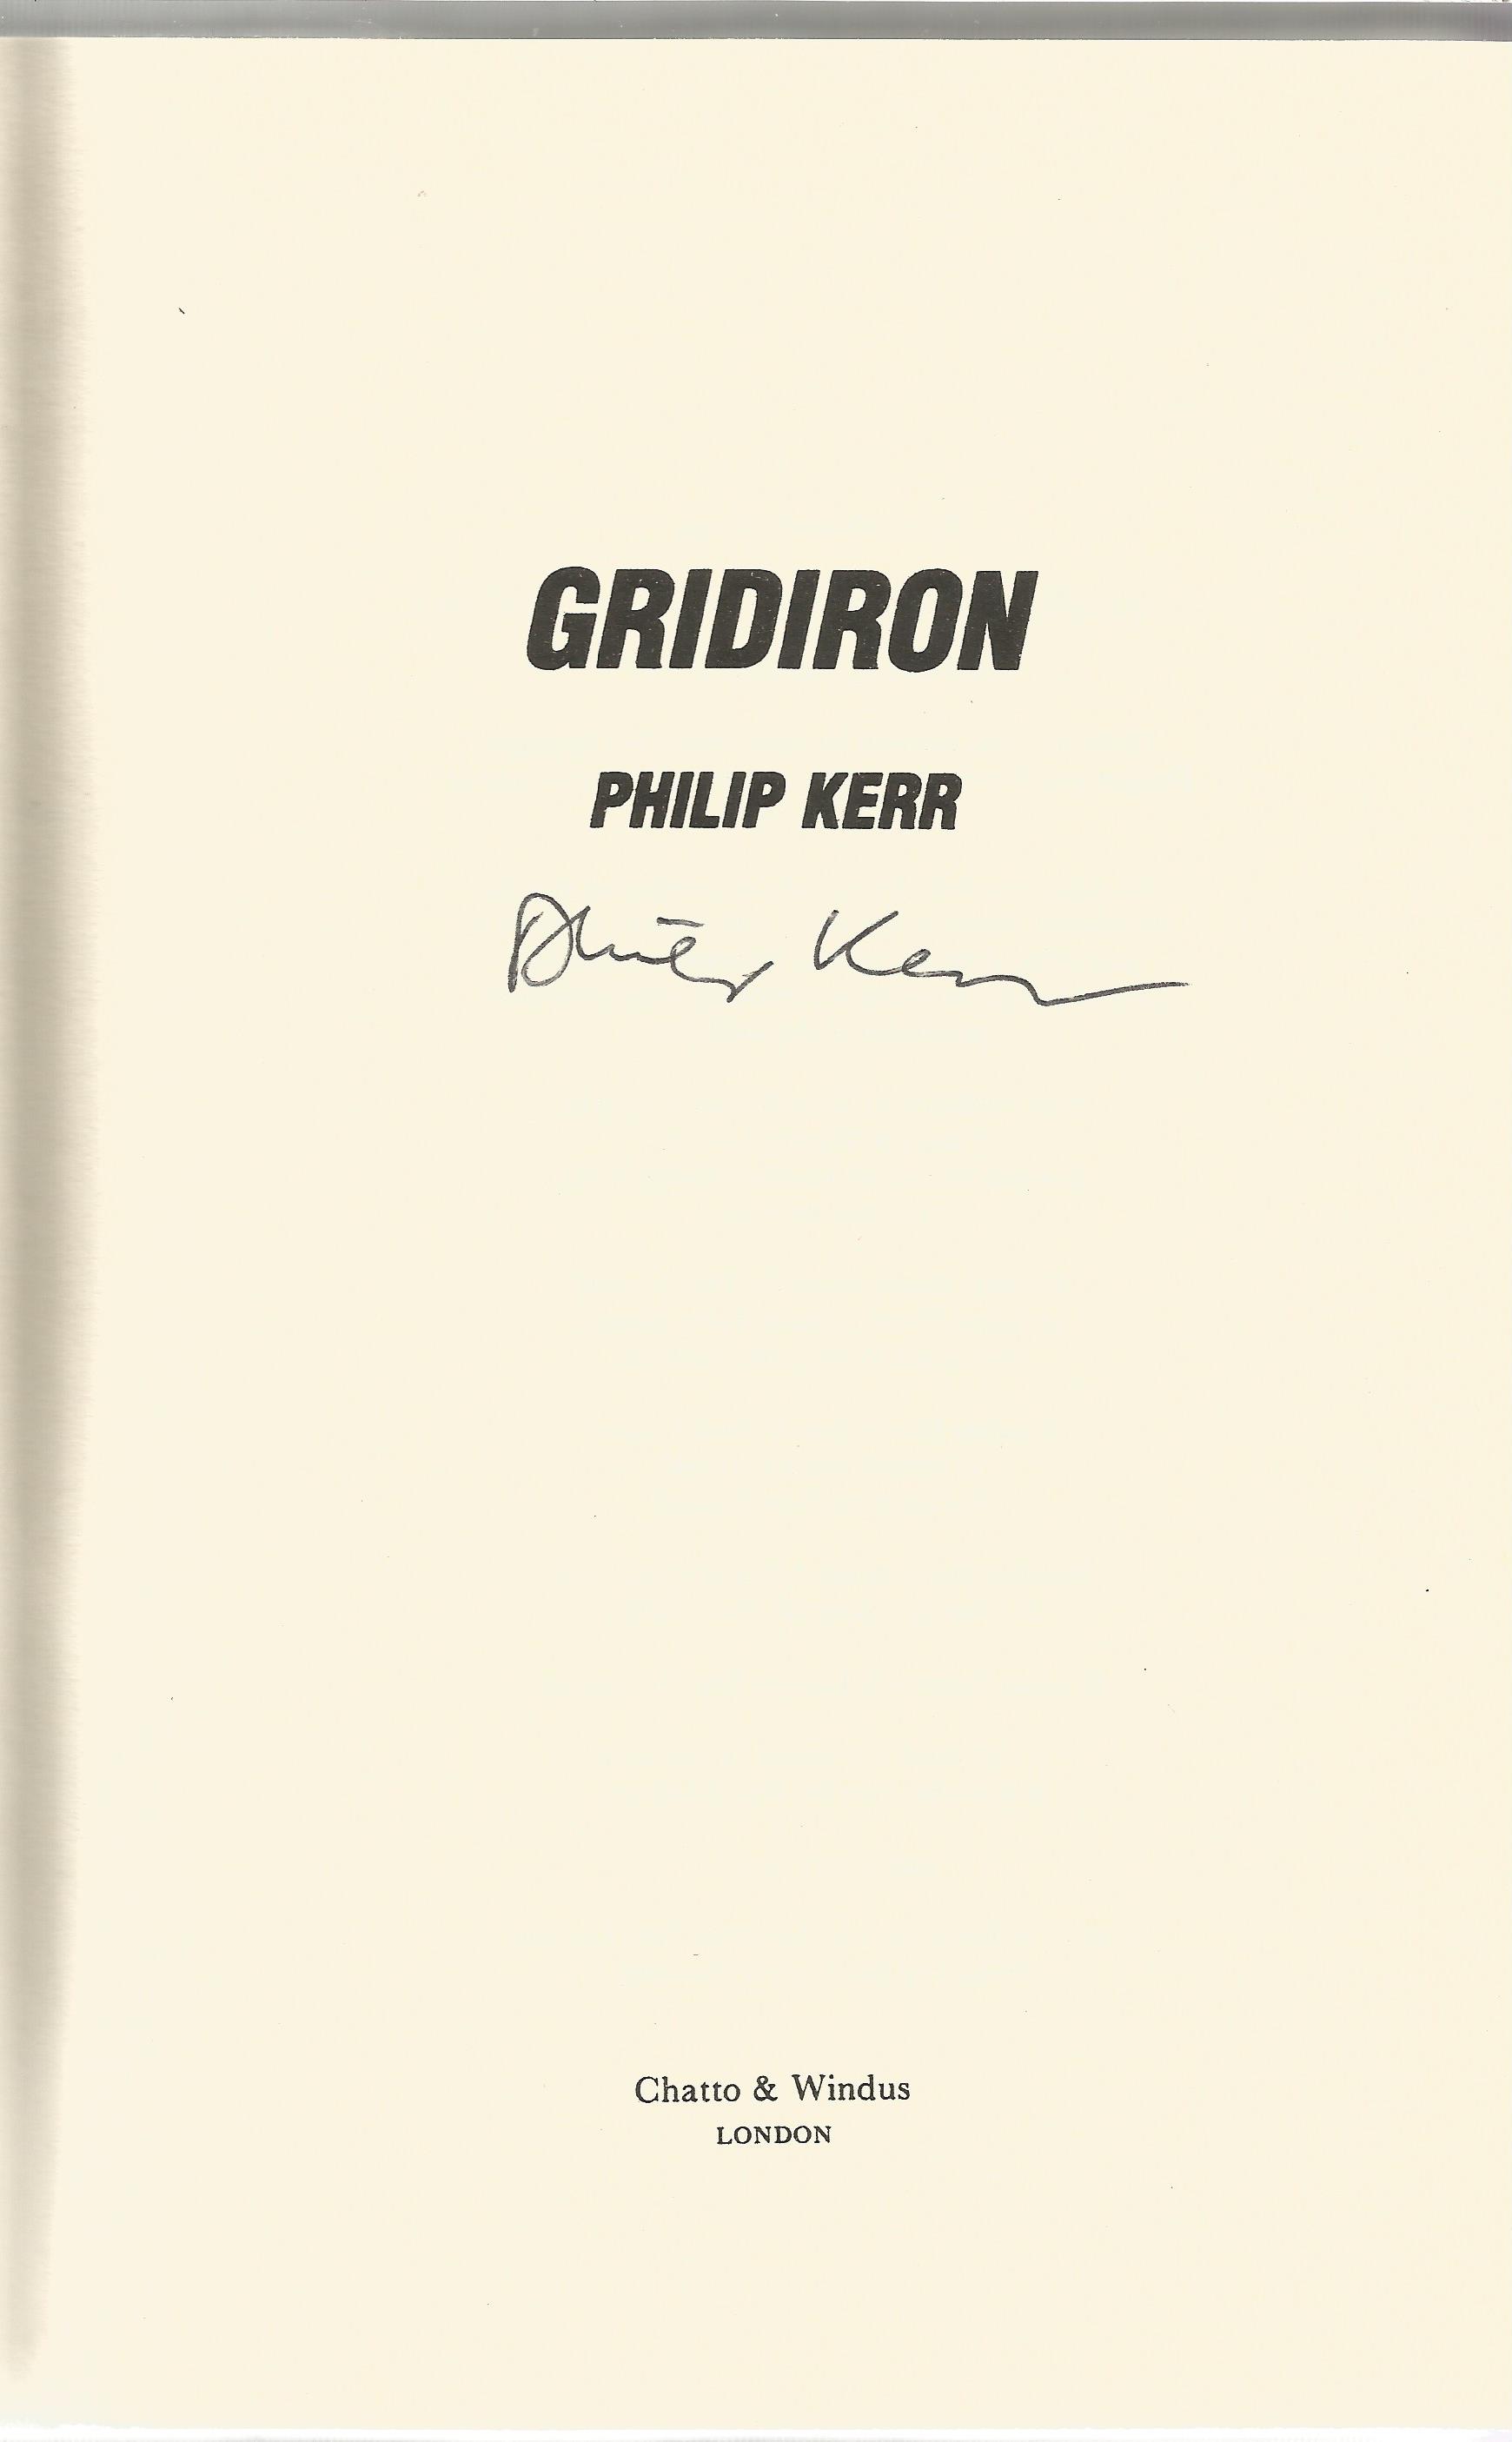 Philip Kerr signed Gridiron. Hard back book with dust cover. Good condition. Signed on the title - Image 2 of 3